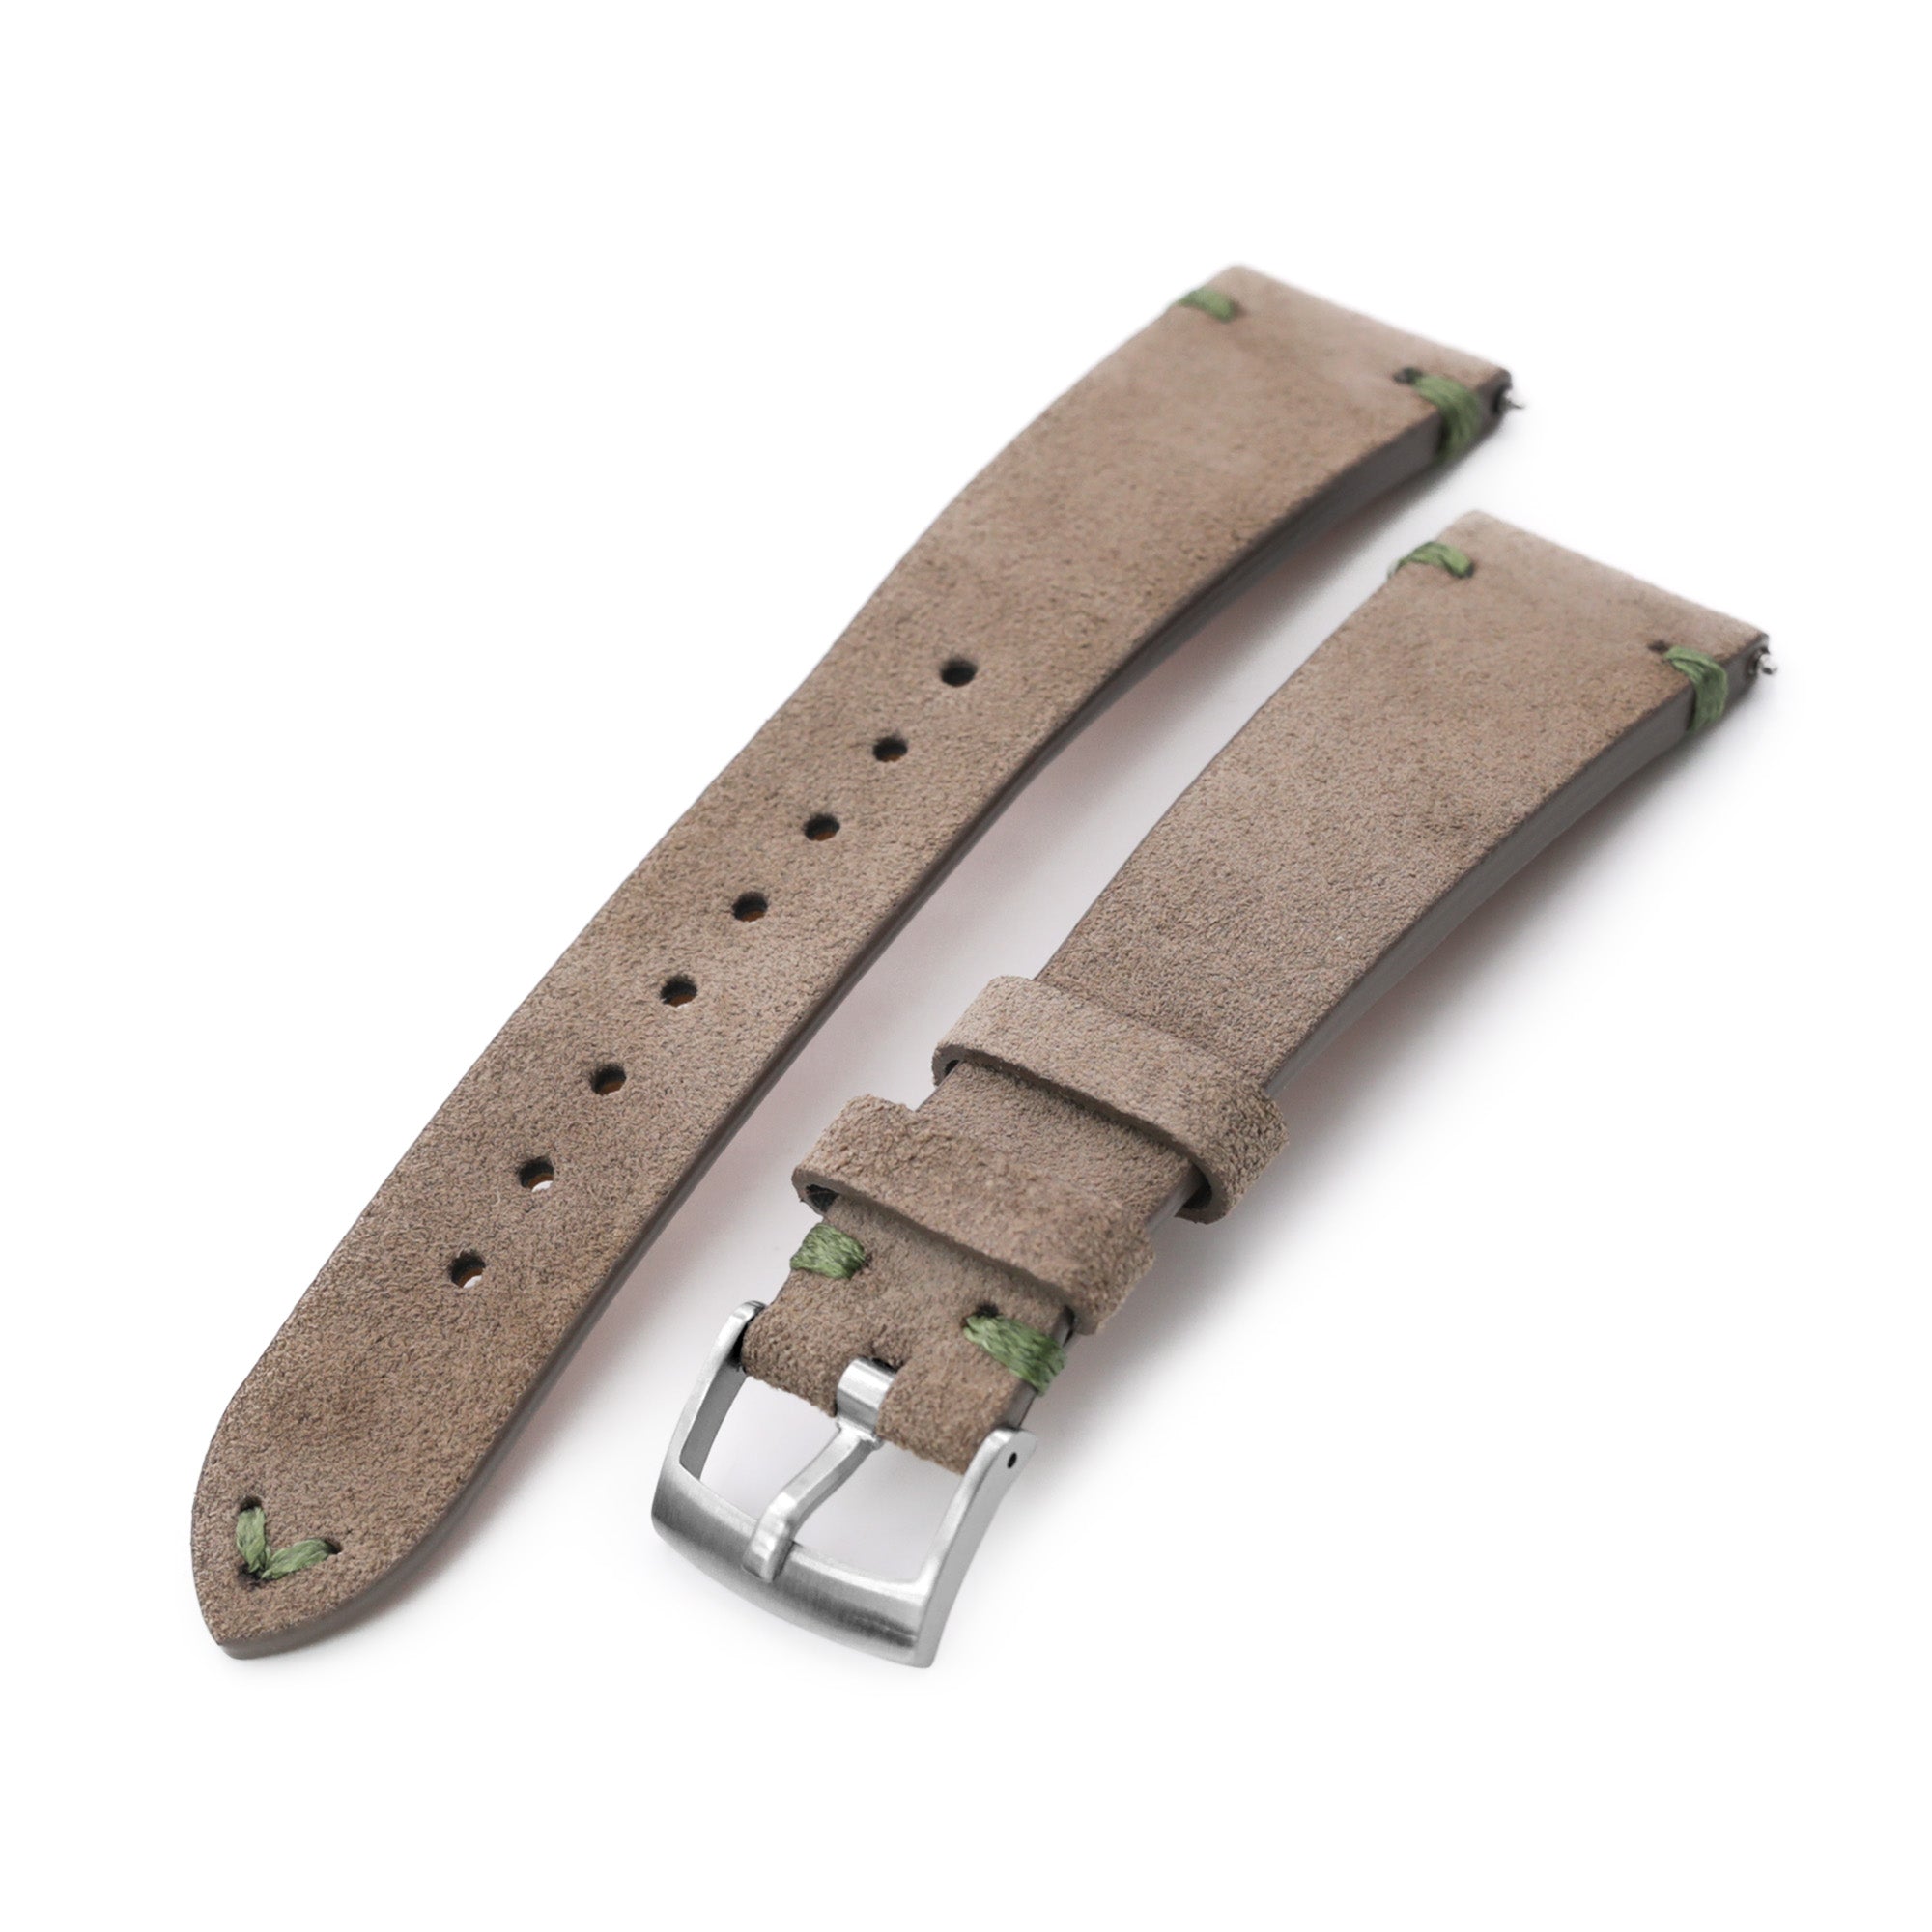 Q.R. Tan / Khaki Suede watch strap 19mm to 21mm Leather Watch Band Green Stitch. Strapcode Watch Bands